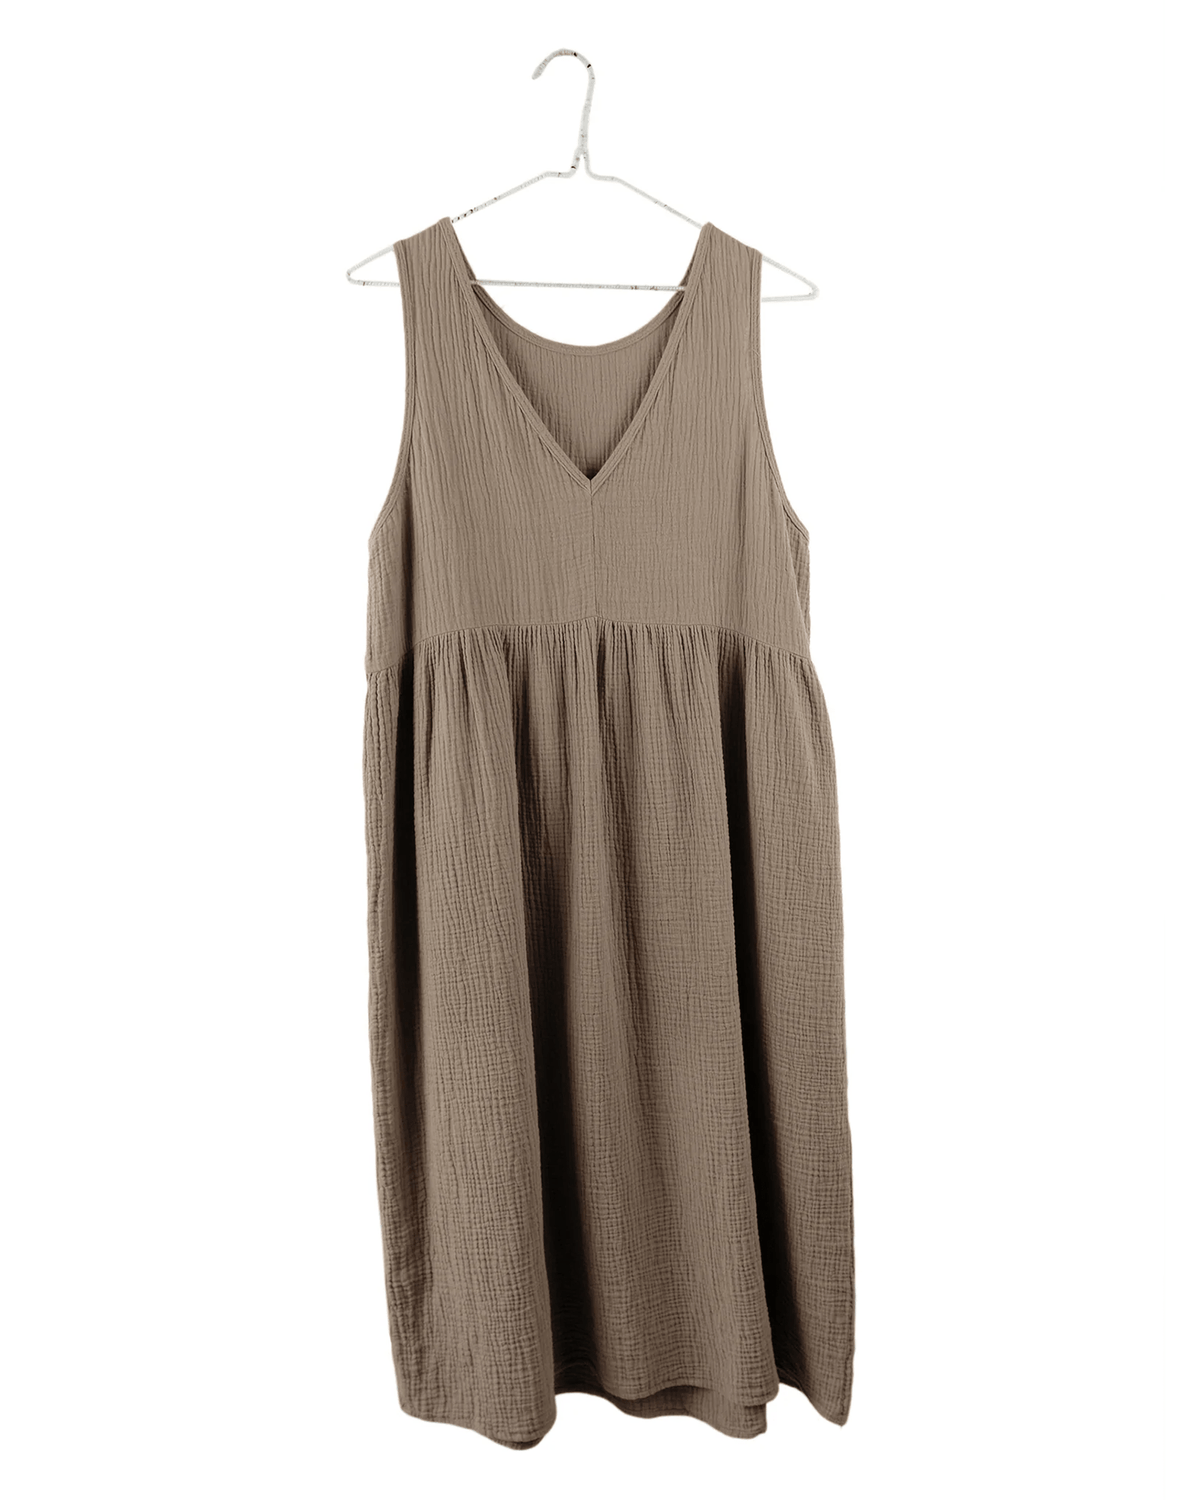 It is well LA Clothing Reversible Dress in Warm Taupe